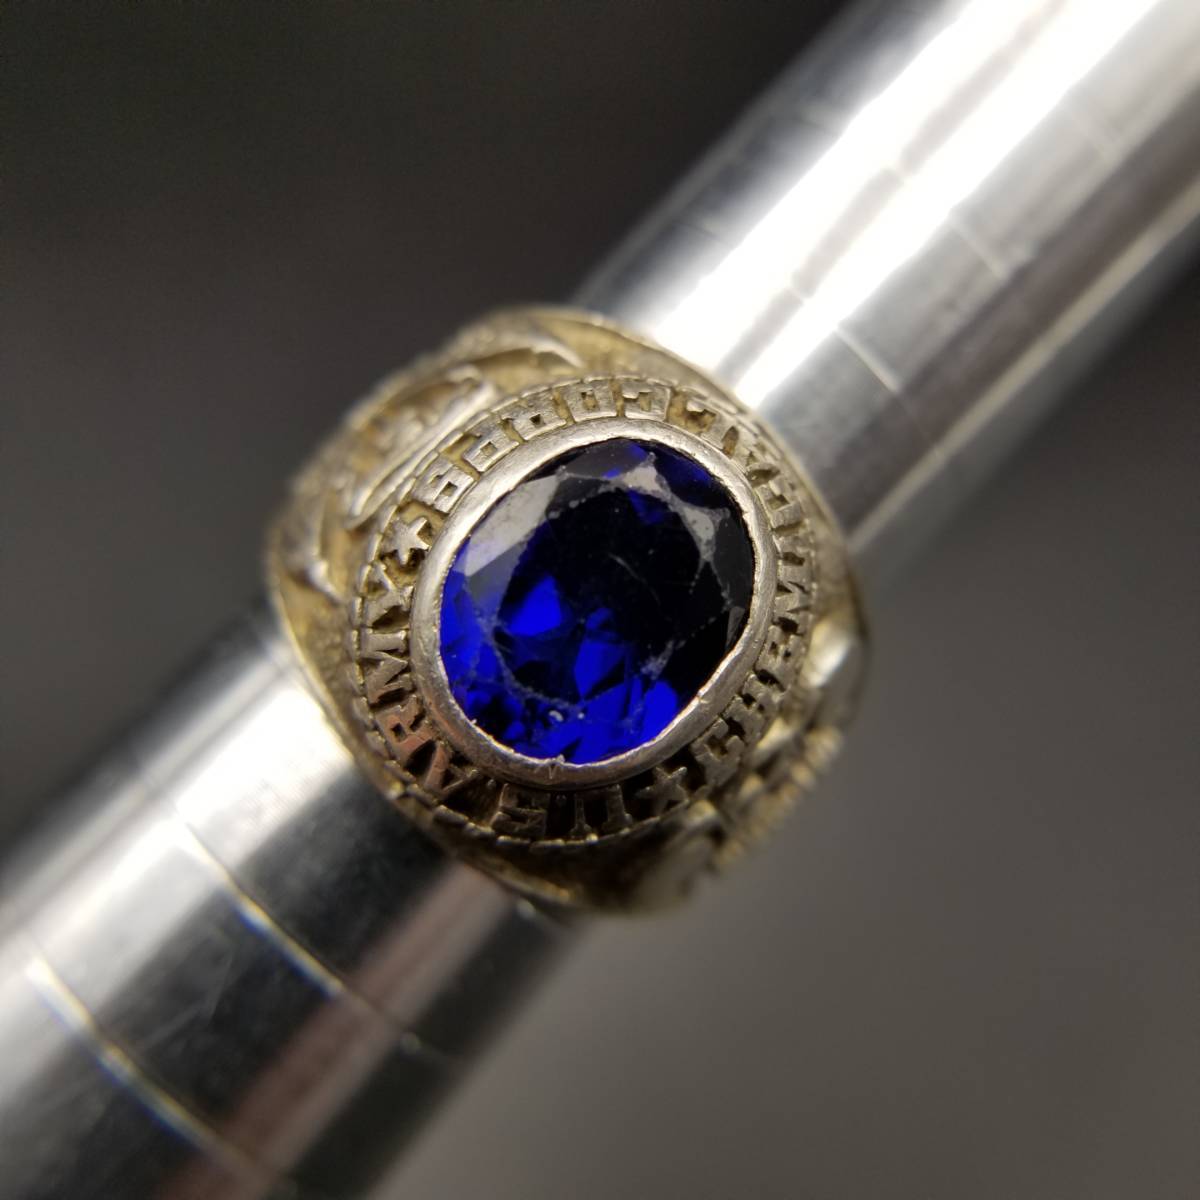 US Army Chemical Corpssig net Vintage 925 silver ring ring blue stone military men's jewelry -ply thickness feeling volume Y13-C